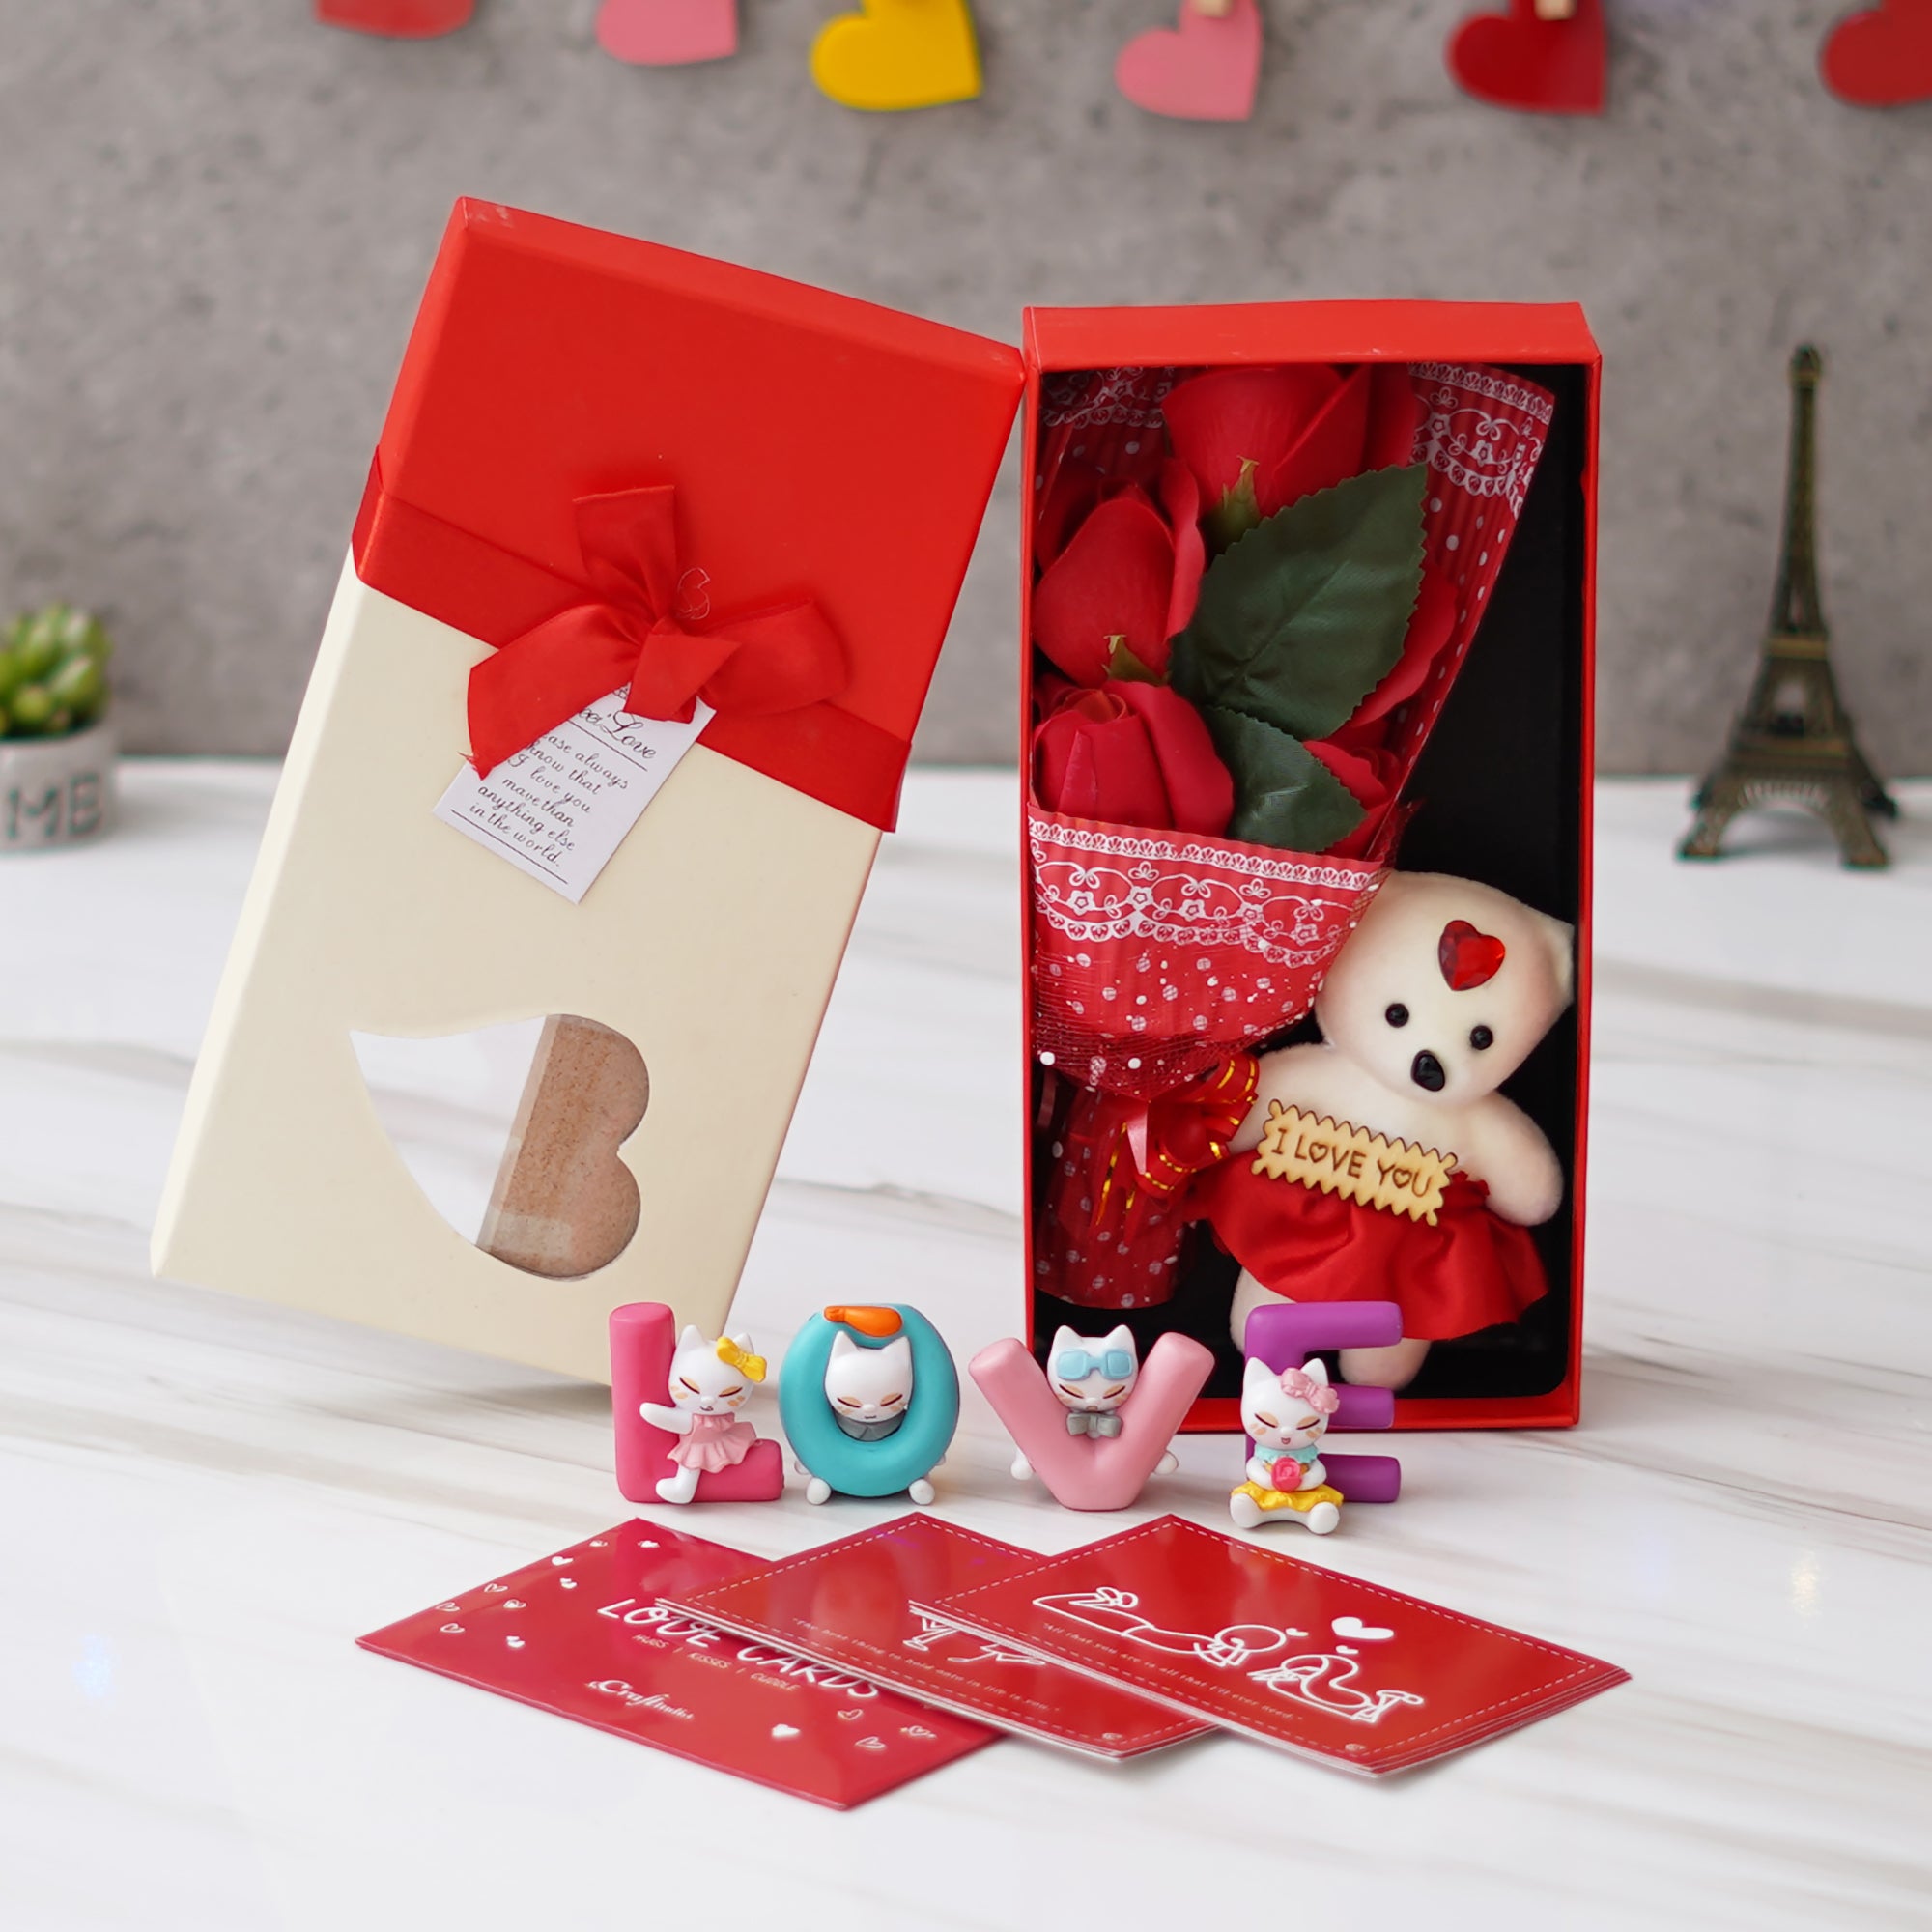 Valentine Combo of Pack of 8 Love Gift Cards, "Love" Animated Characters Showpiece, Red Roses Bouquet and White, Red Teddy Bear Valentine's Rectangle Shaped Gift Box